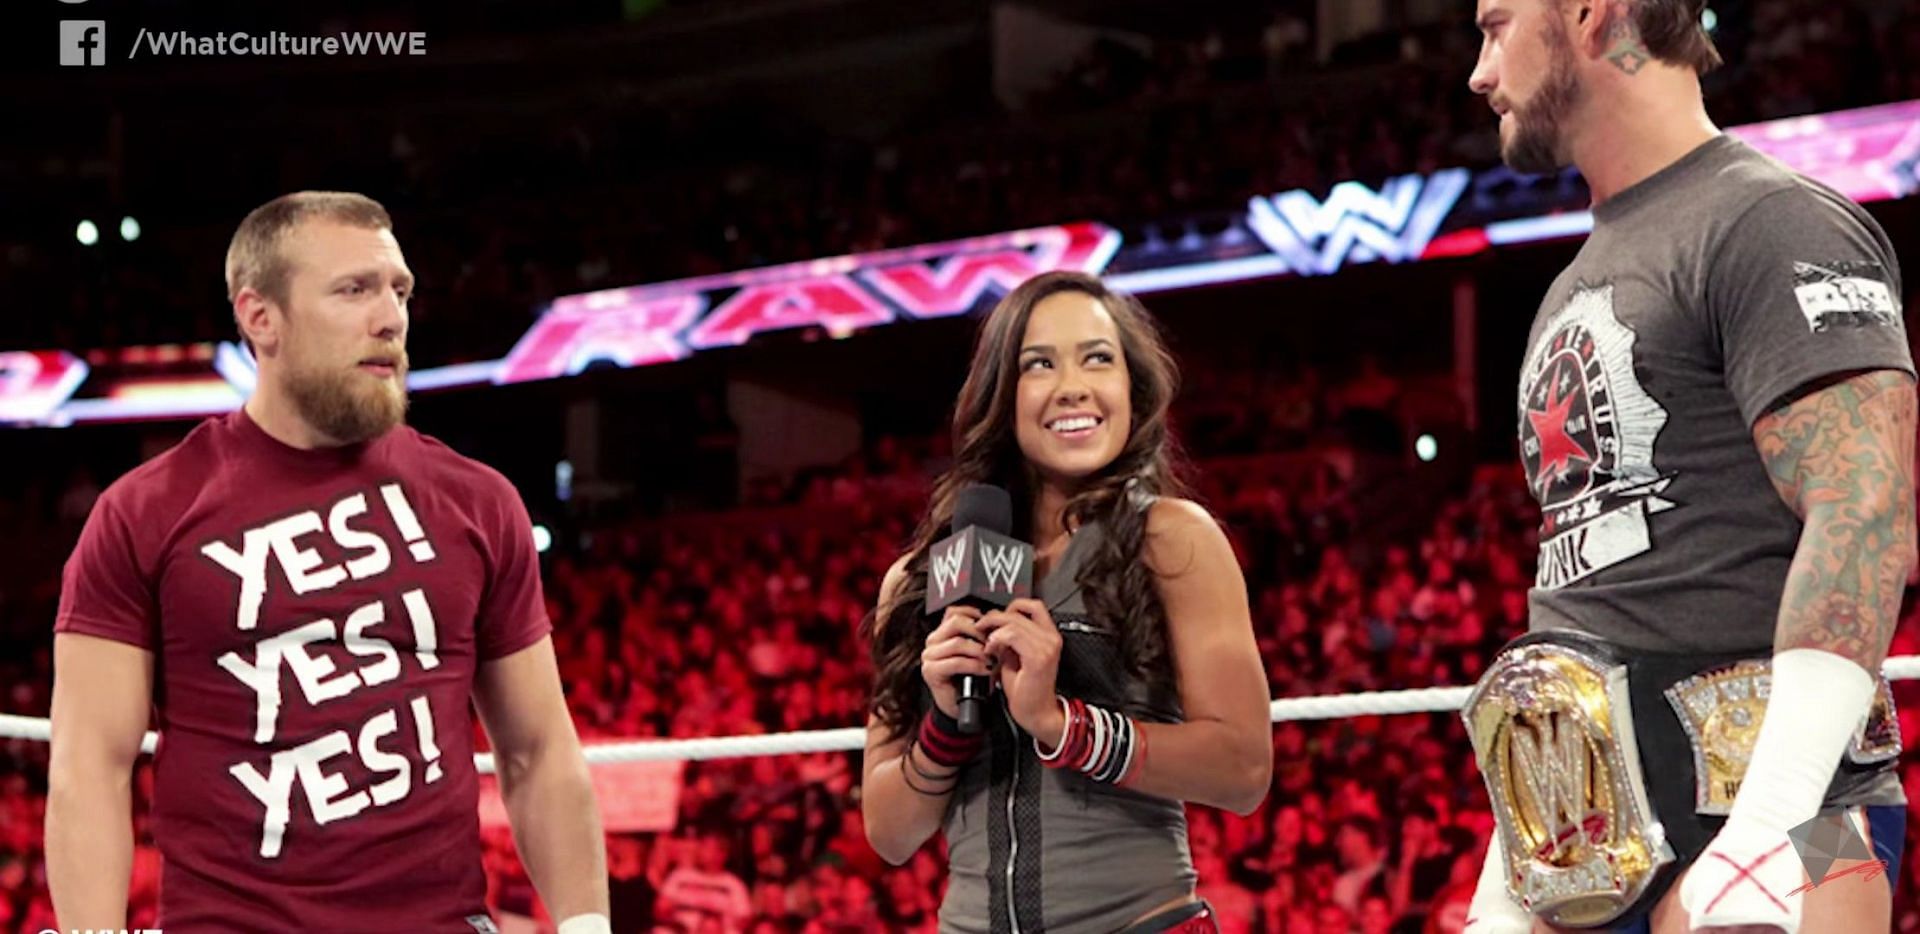 The Daniel Bryan, AJ Lee and CM Punk love triangle unraveled on WWE television throughout mid-2012